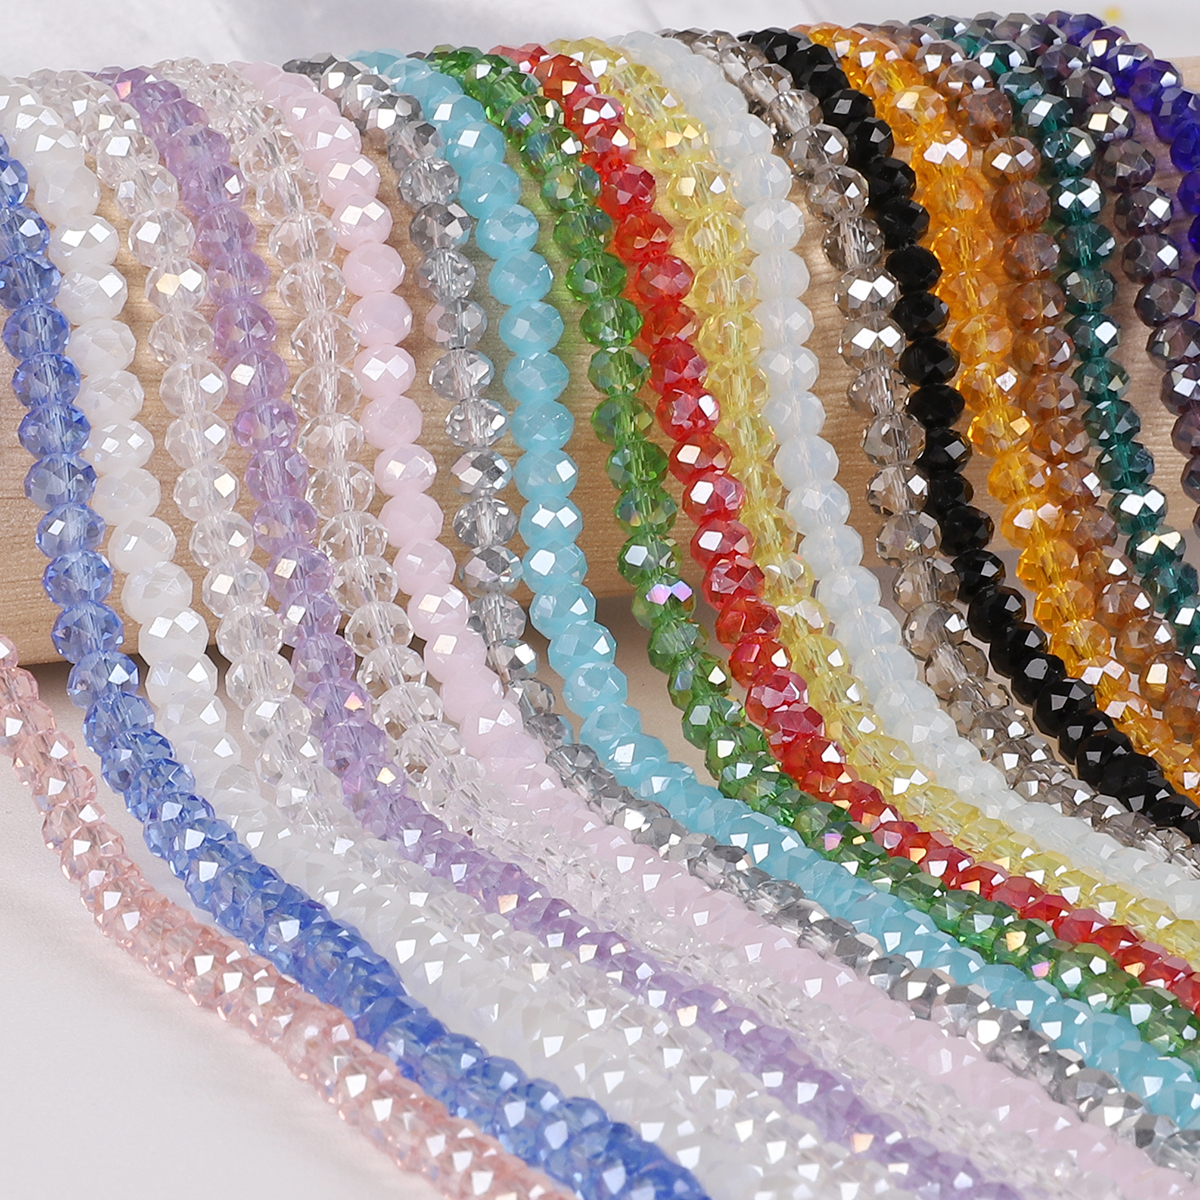 100pcs 6mm Rondelle Faceted Crystal Glass Loose Spacer Beads Jewelry Makings#G 